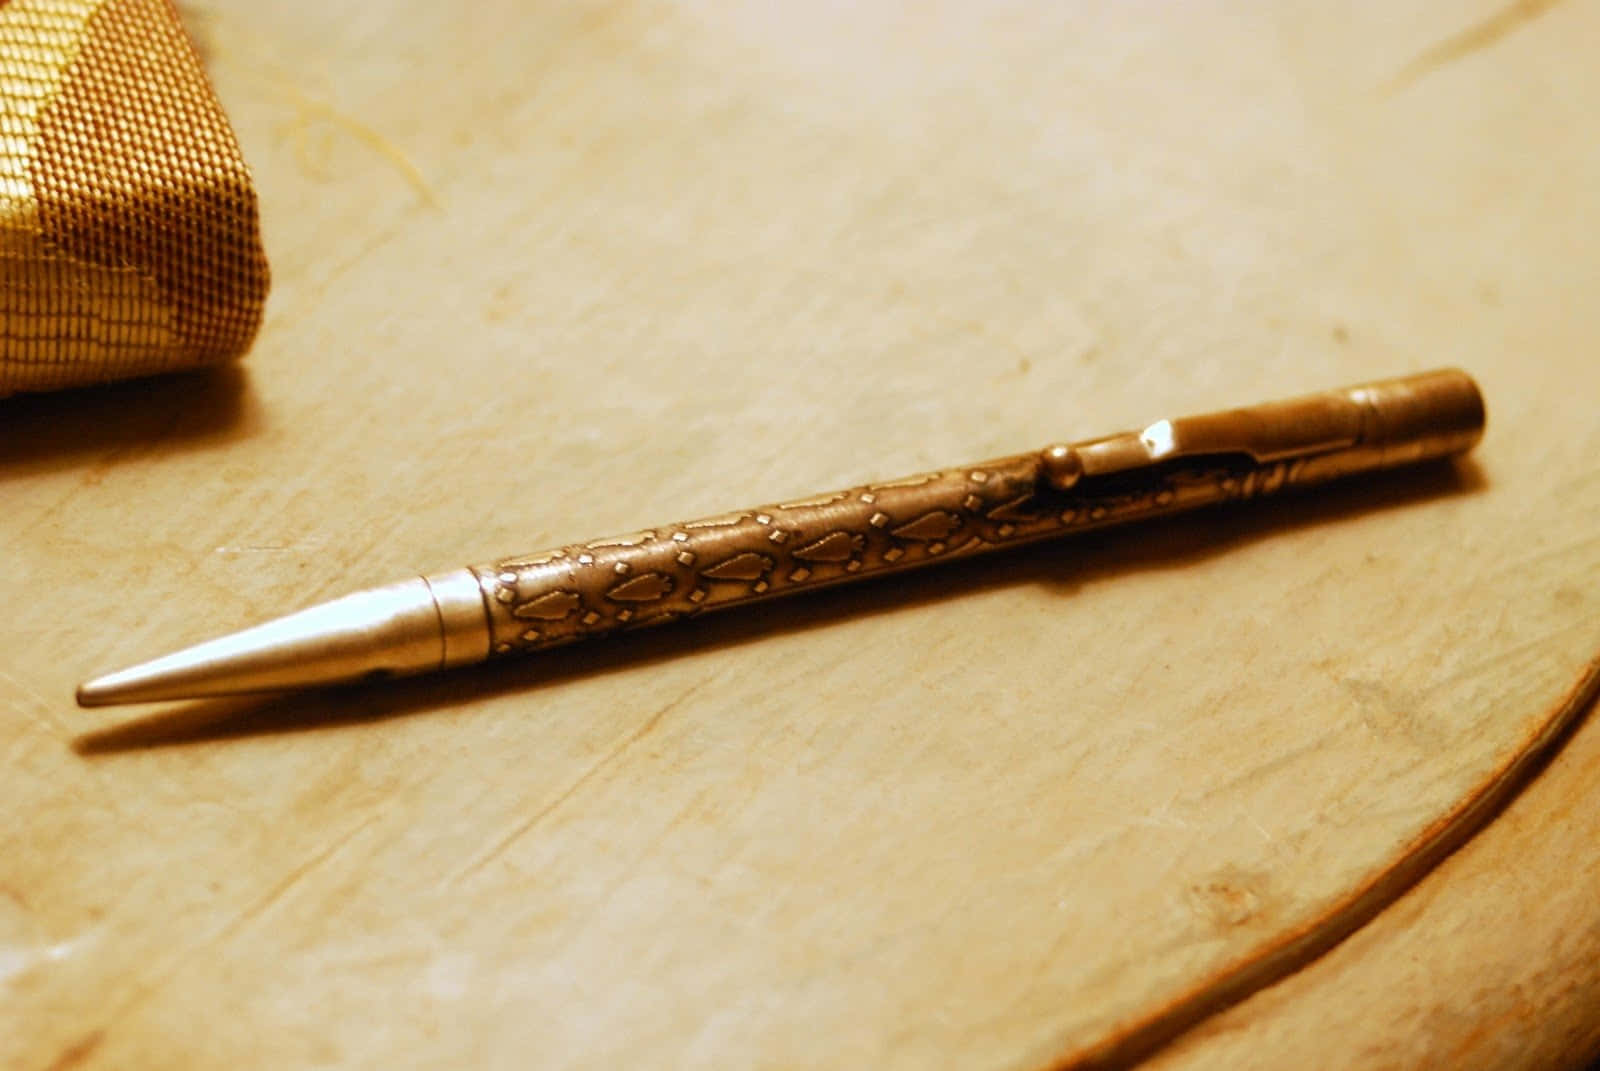 A Pen On A Wooden Table